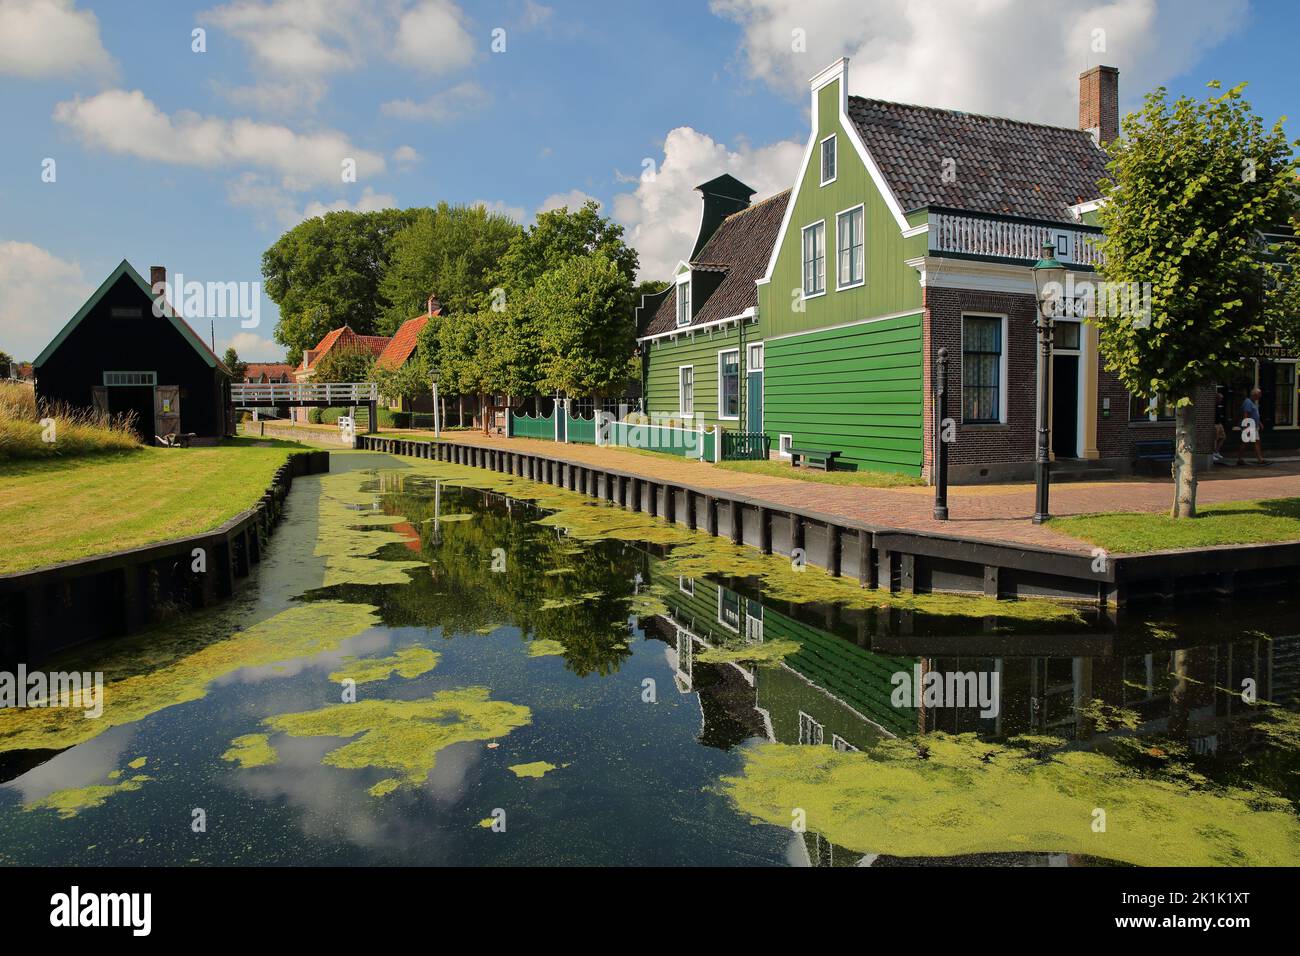 ENKHUIZEN, NETHERLANDS - SEPTEMBER 11, 2022: Zuiderzeemuseum, an open air museum on the shore of Ijsselmeer, with traditional cottages, canals Stock Photo